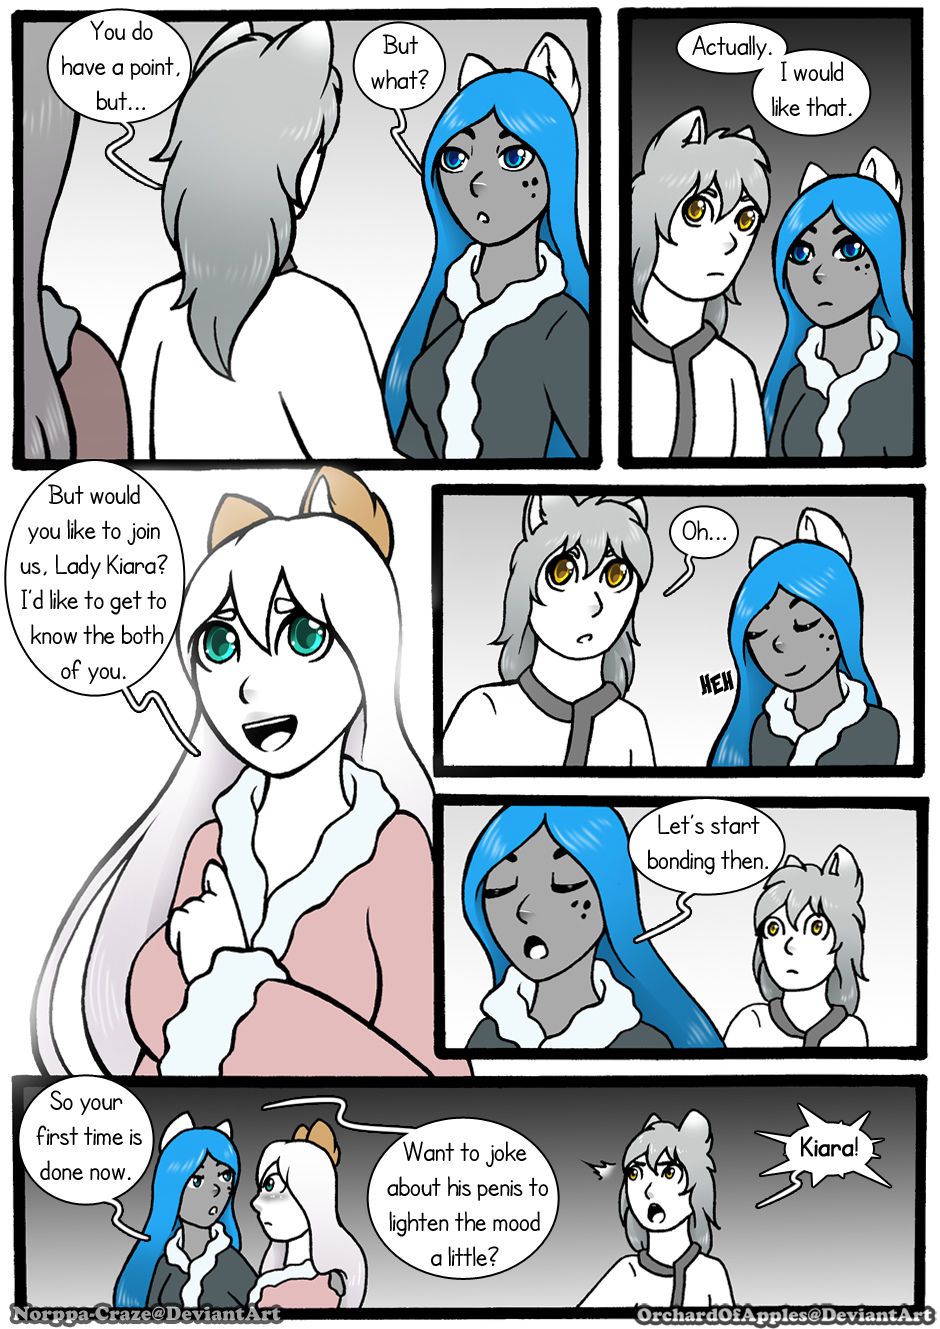 [Jeny-jen94] Between Kings and Queens [Ongoing] 269